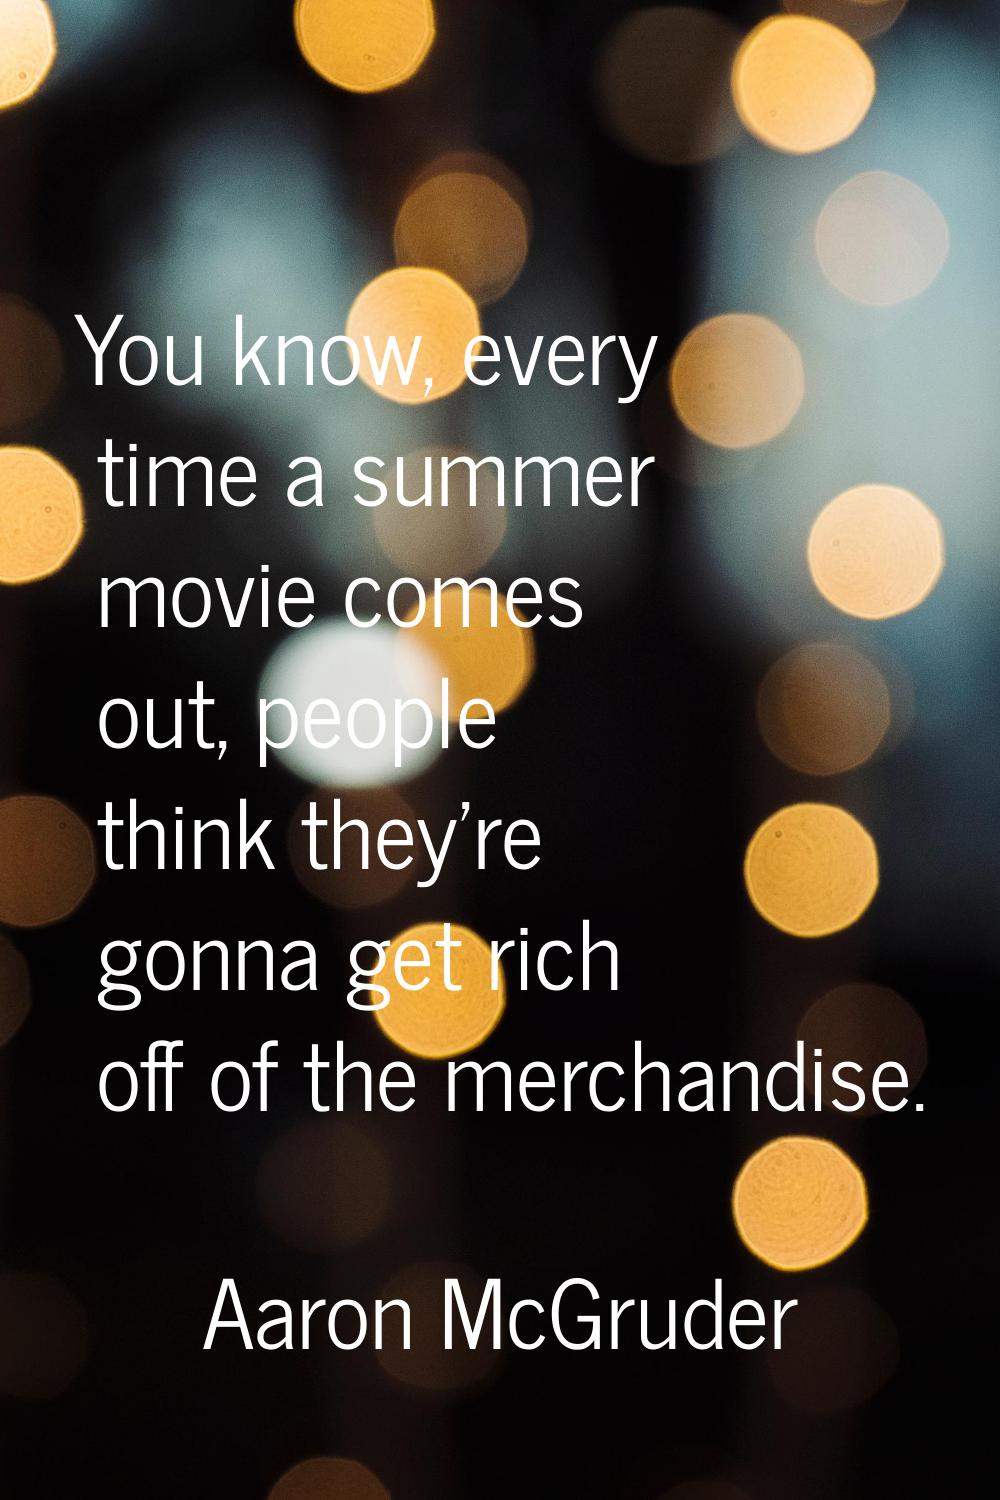 You know, every time a summer movie comes out, people think they're gonna get rich off of the merch